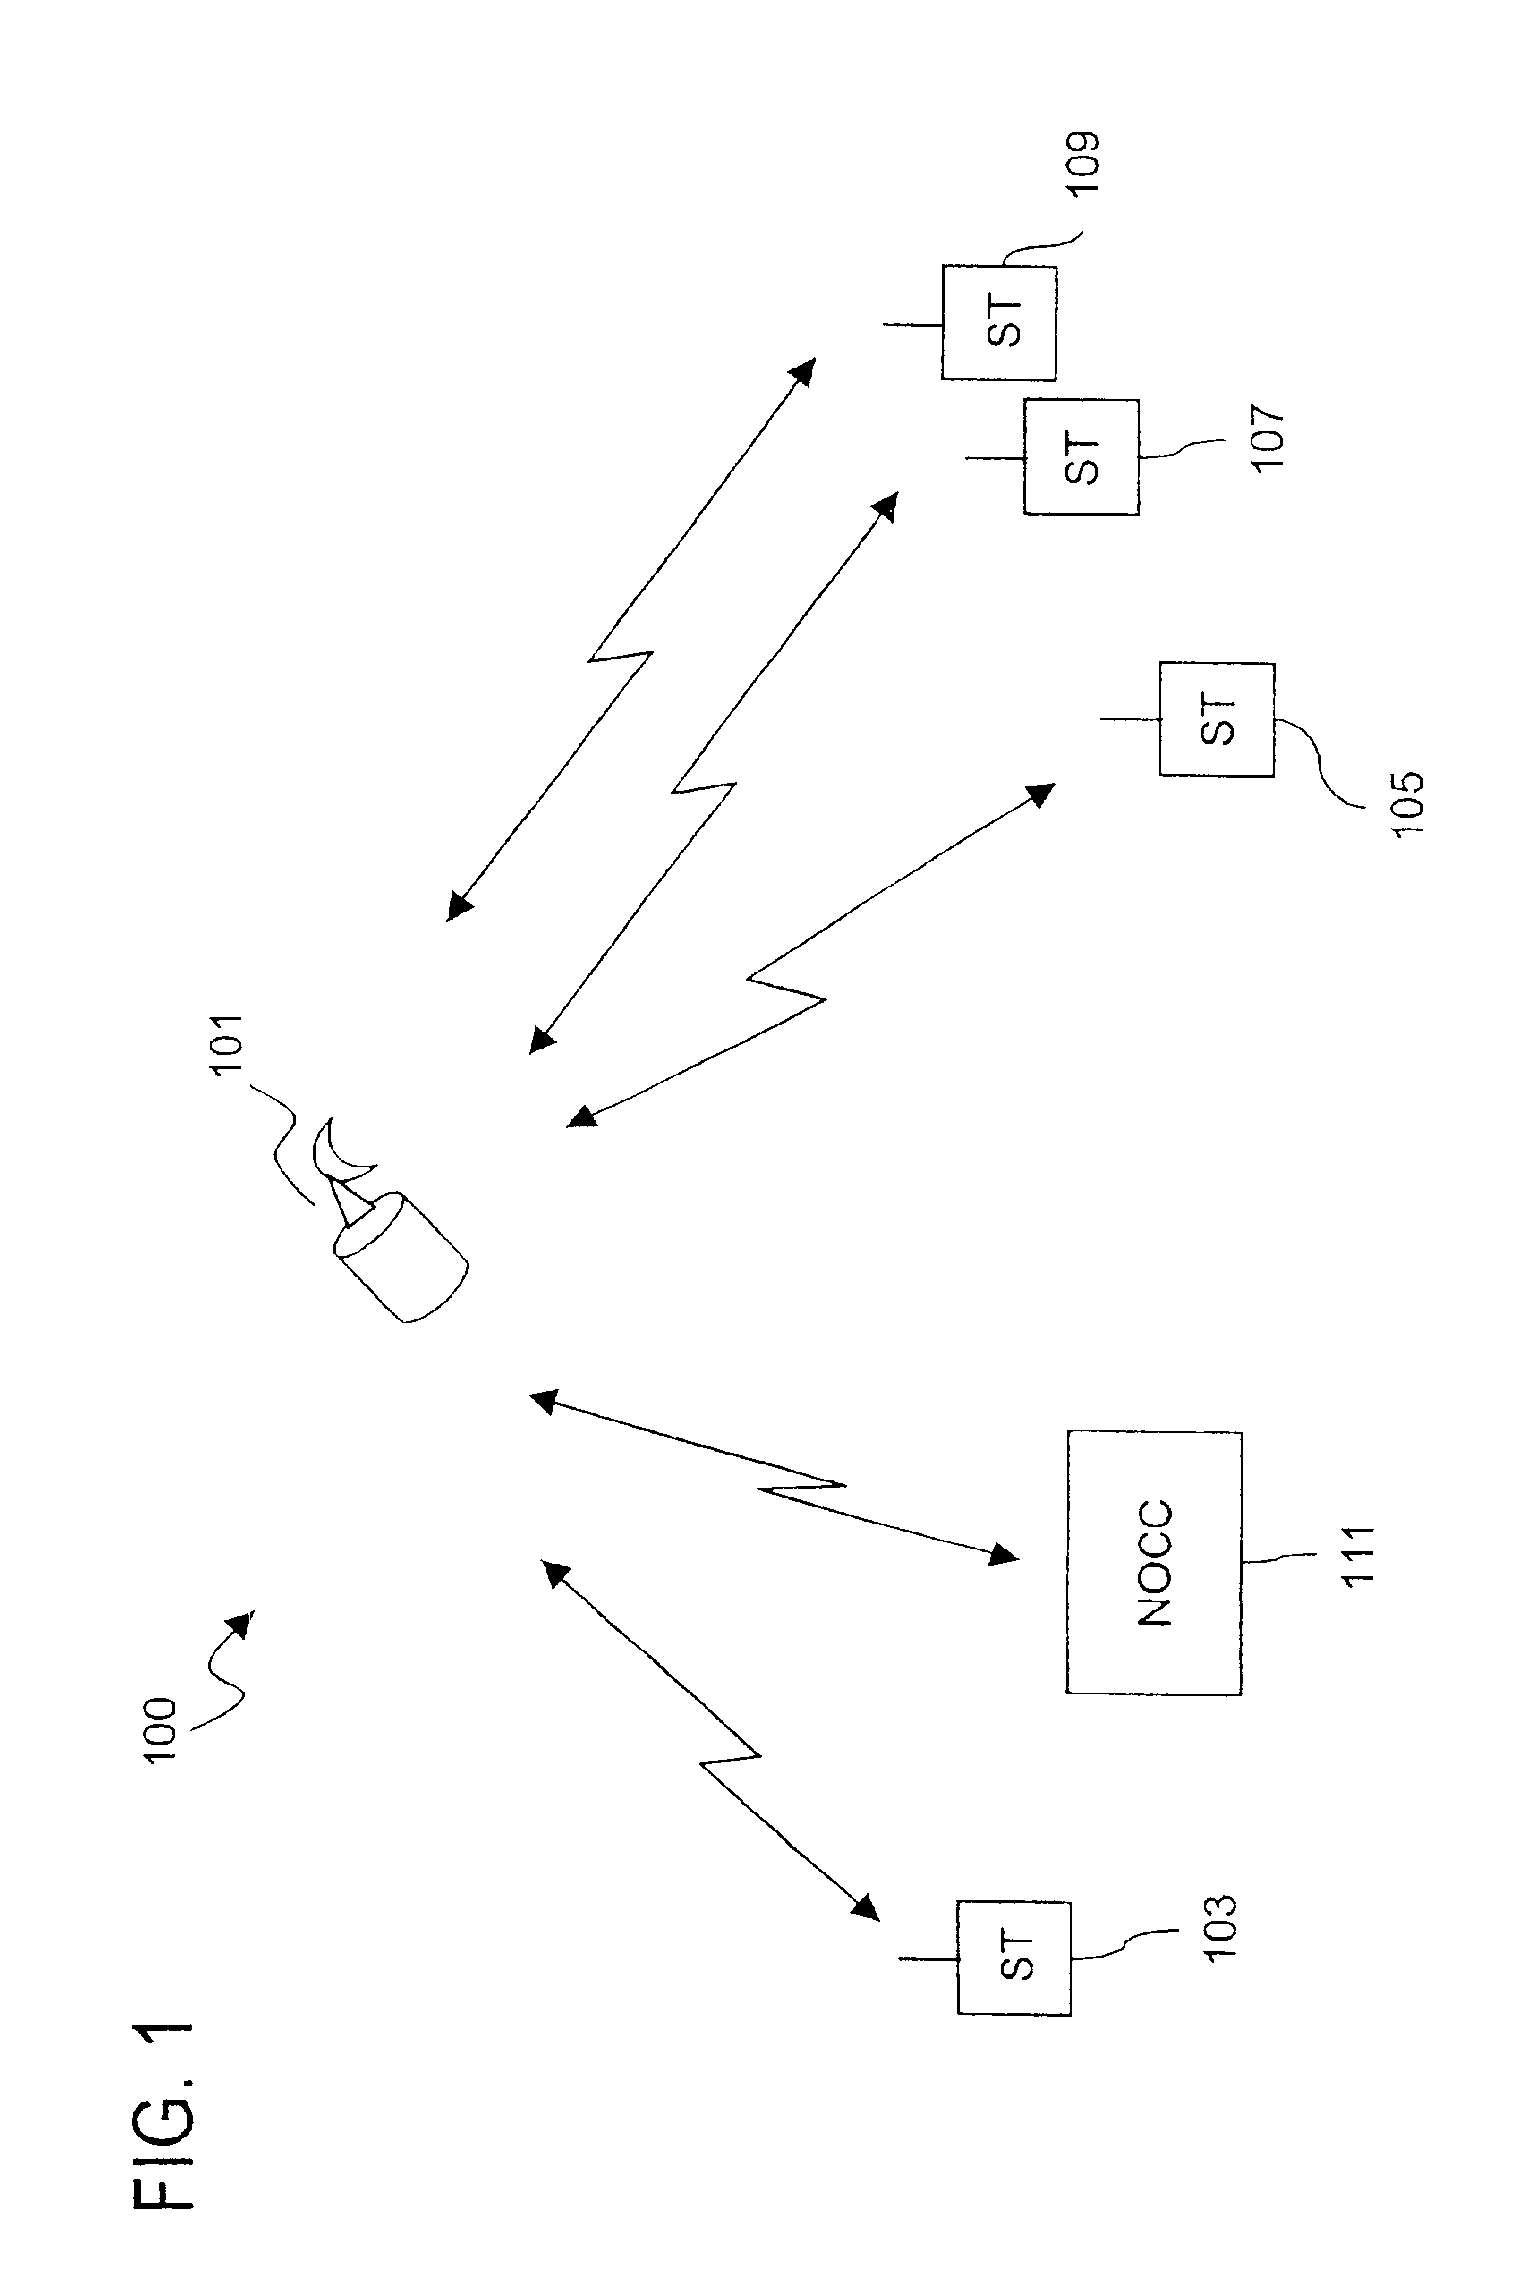 Low latency handling of transmission control protocol messages in a broadband satellite communications system